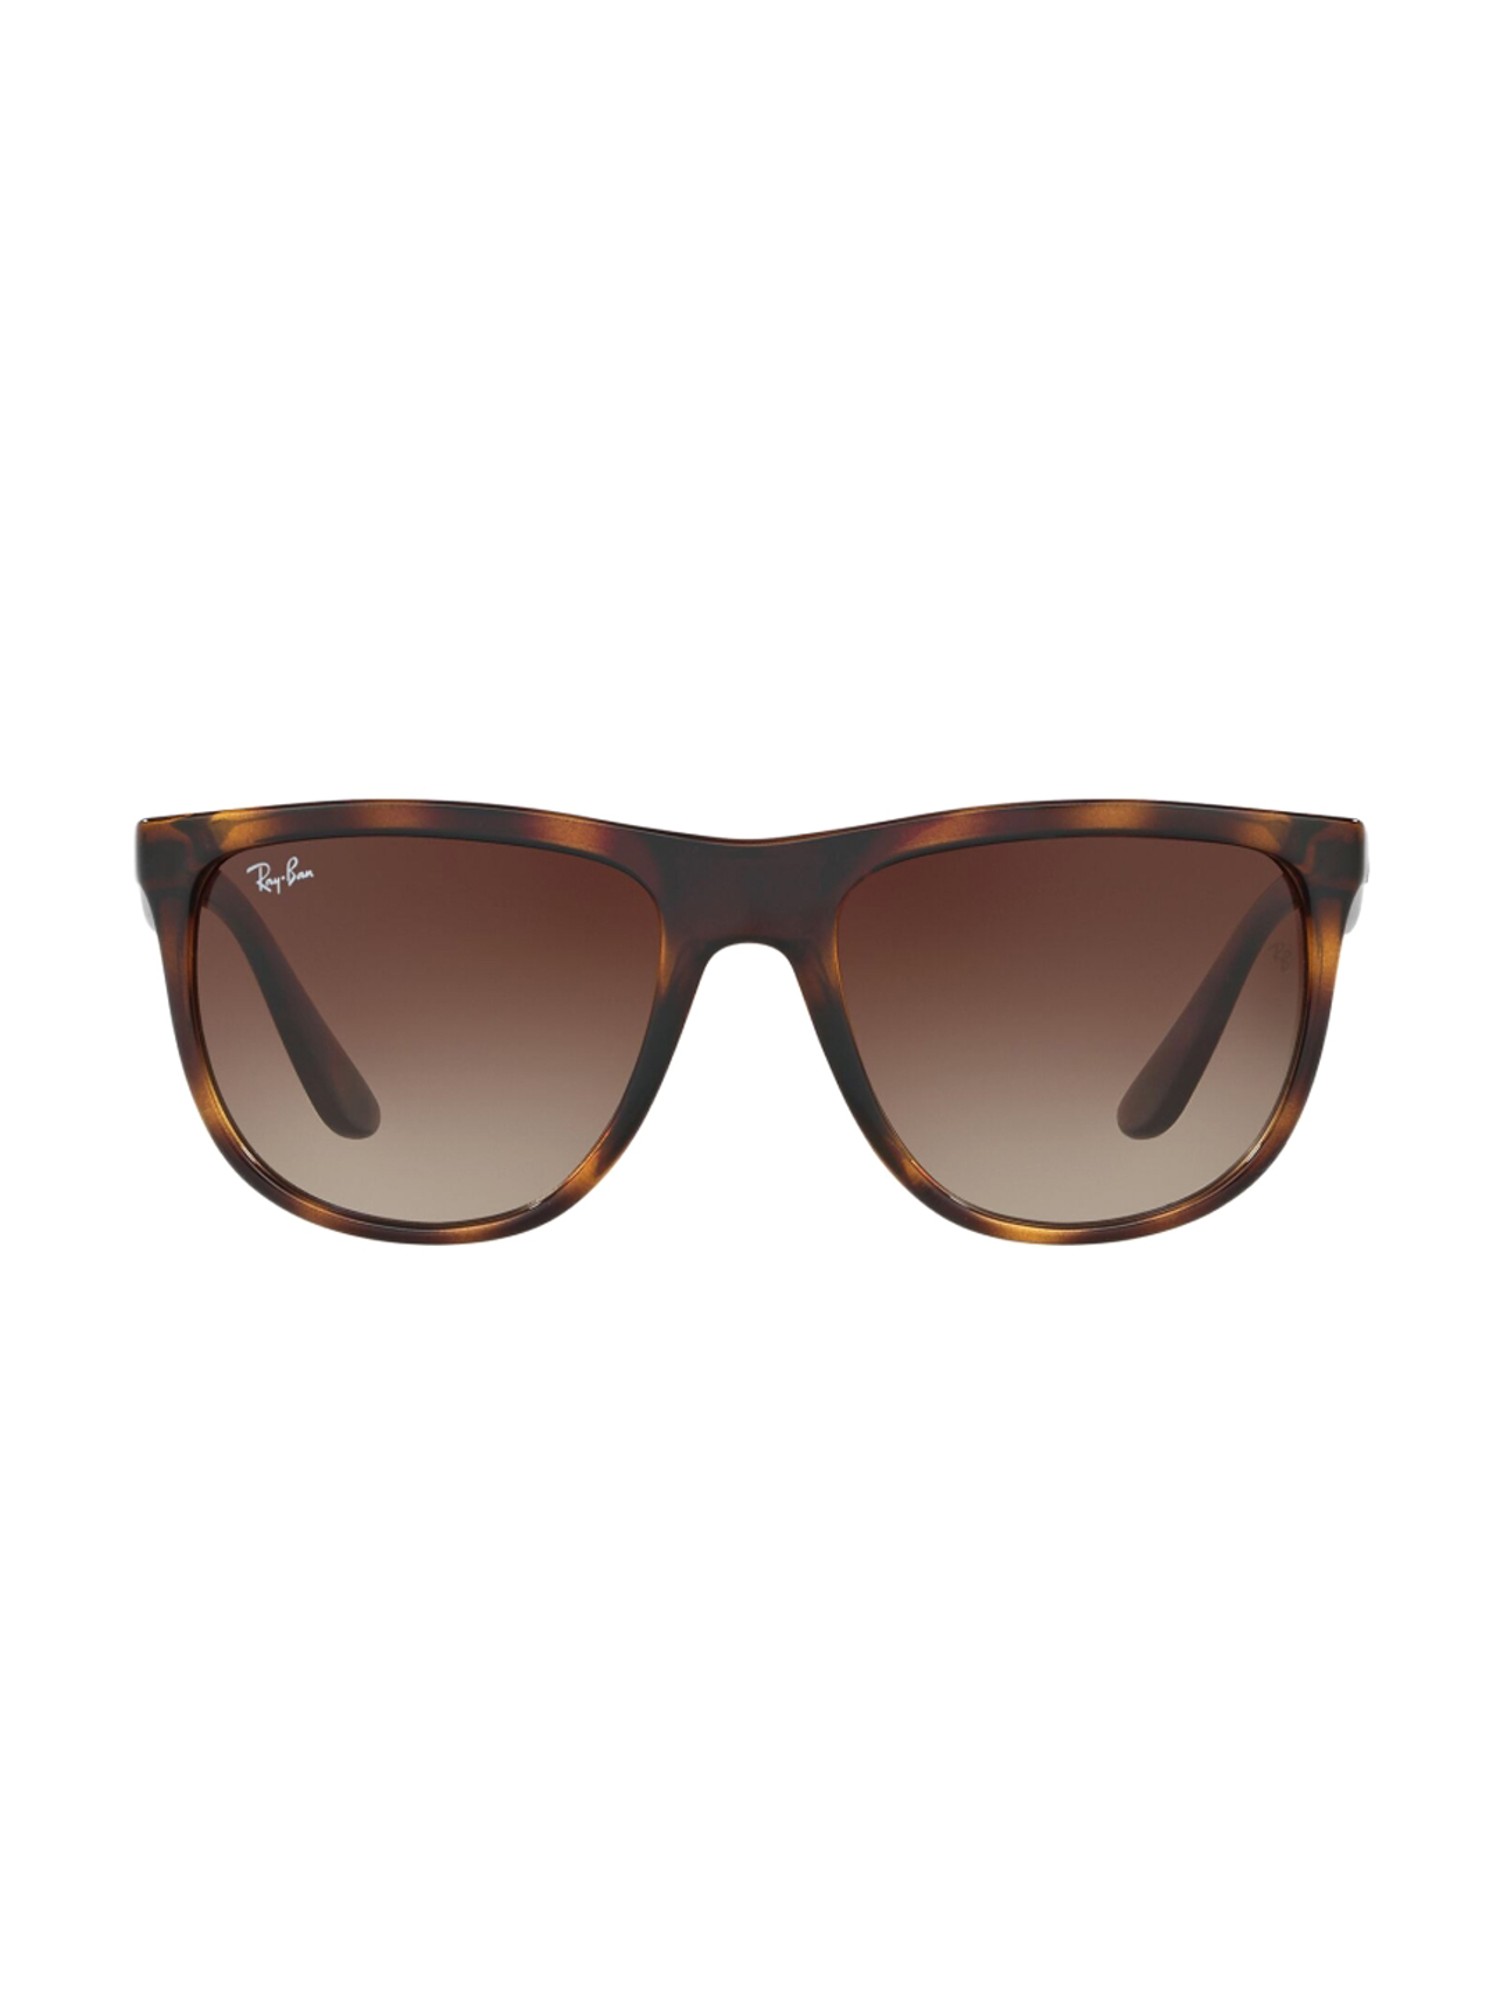 Buy Ray Ban 0rb4251i Brown Highstreet Square Sunglasses 56 Mm Online At Best Prices Tata Cliq